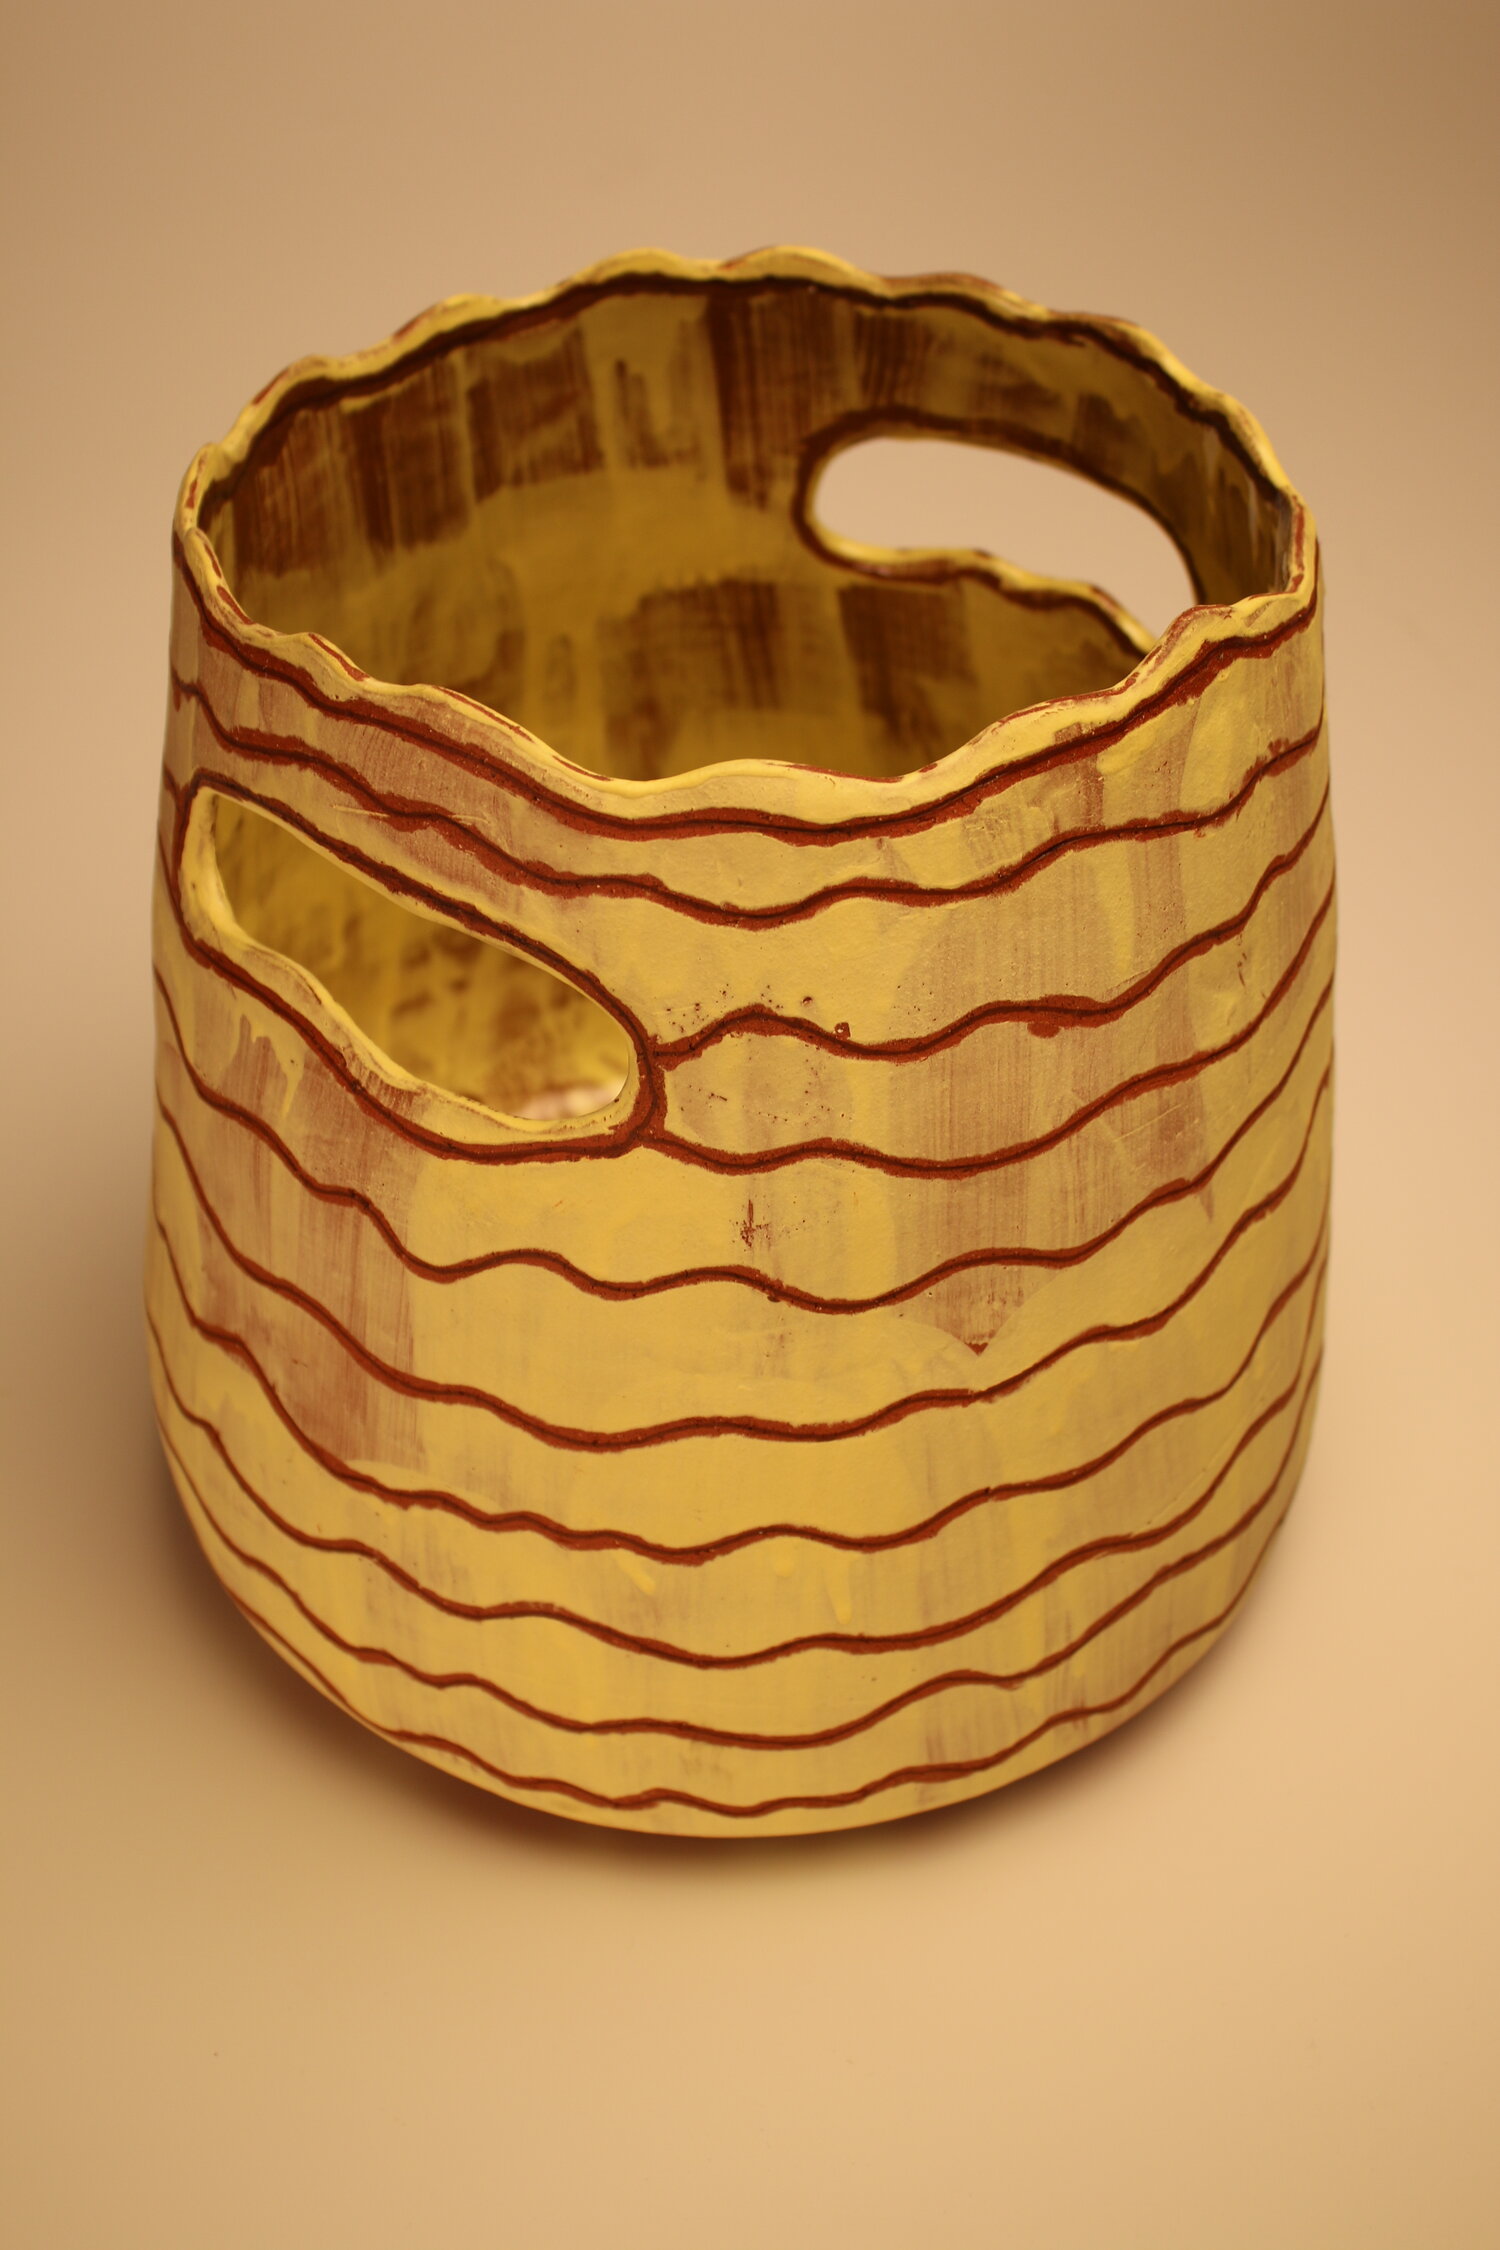 large yellow ceramic basket with thin brown inlaid stripes and handles, image courtesy of the artist